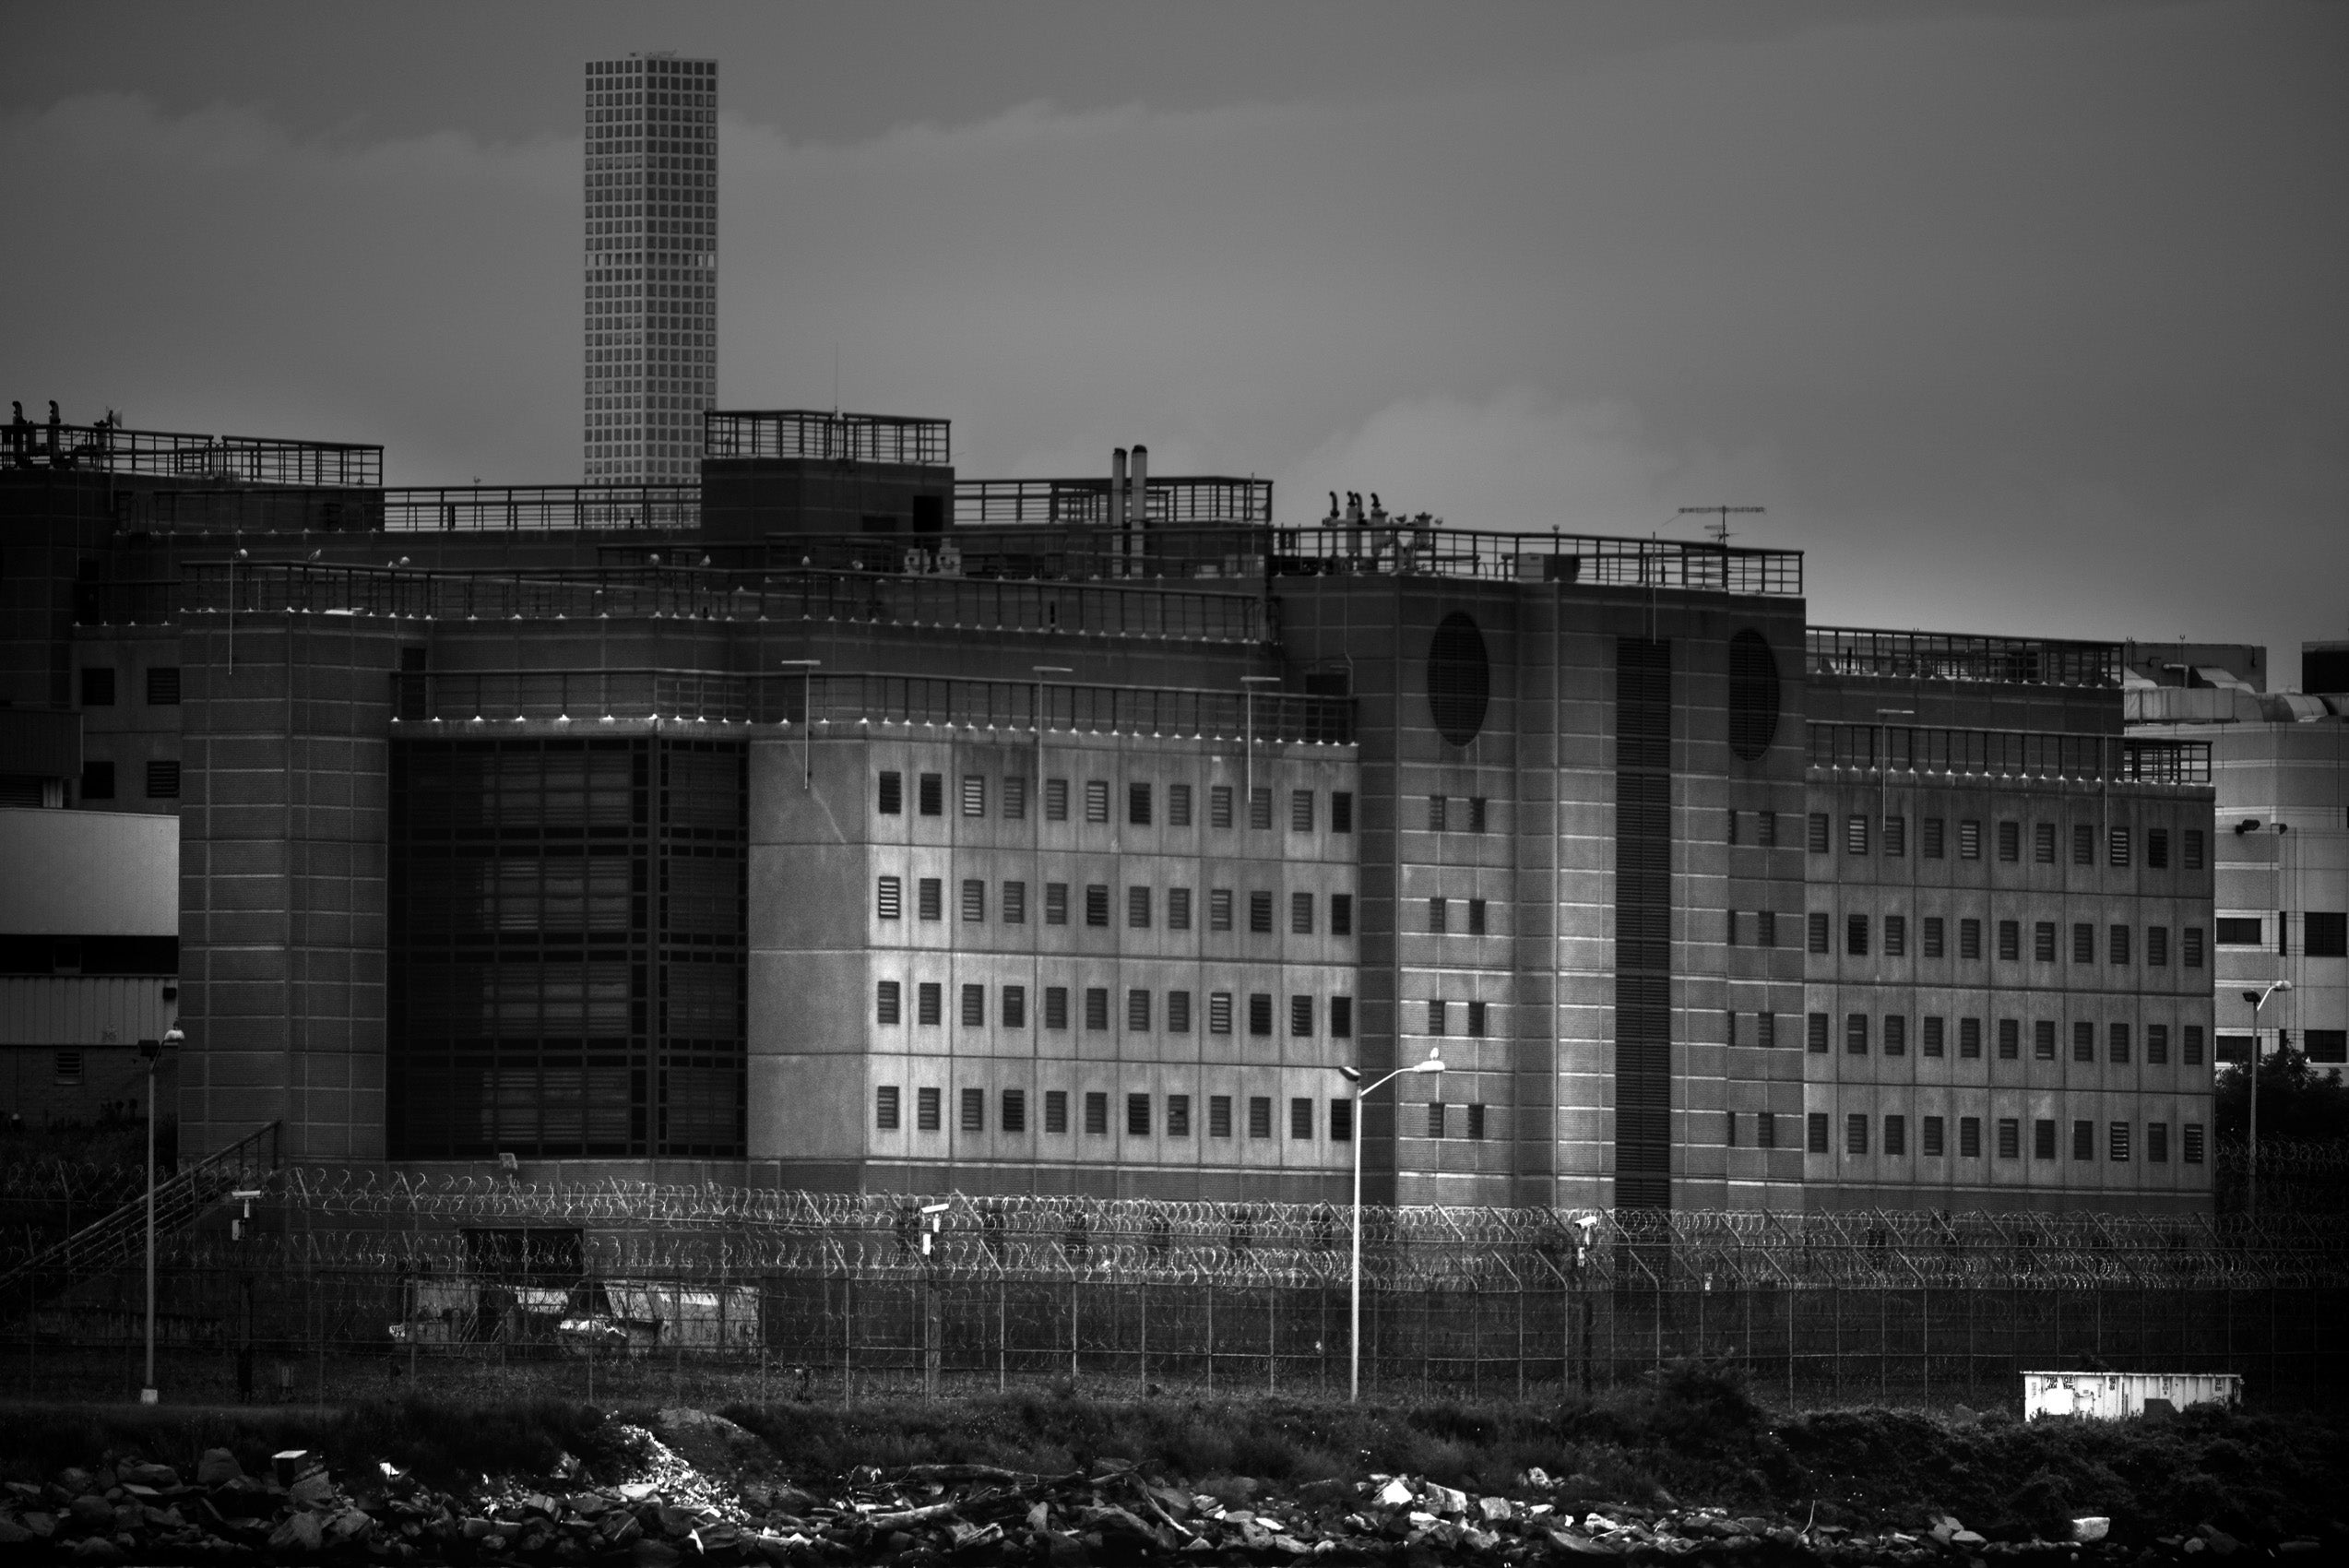 black and white image of a large prison